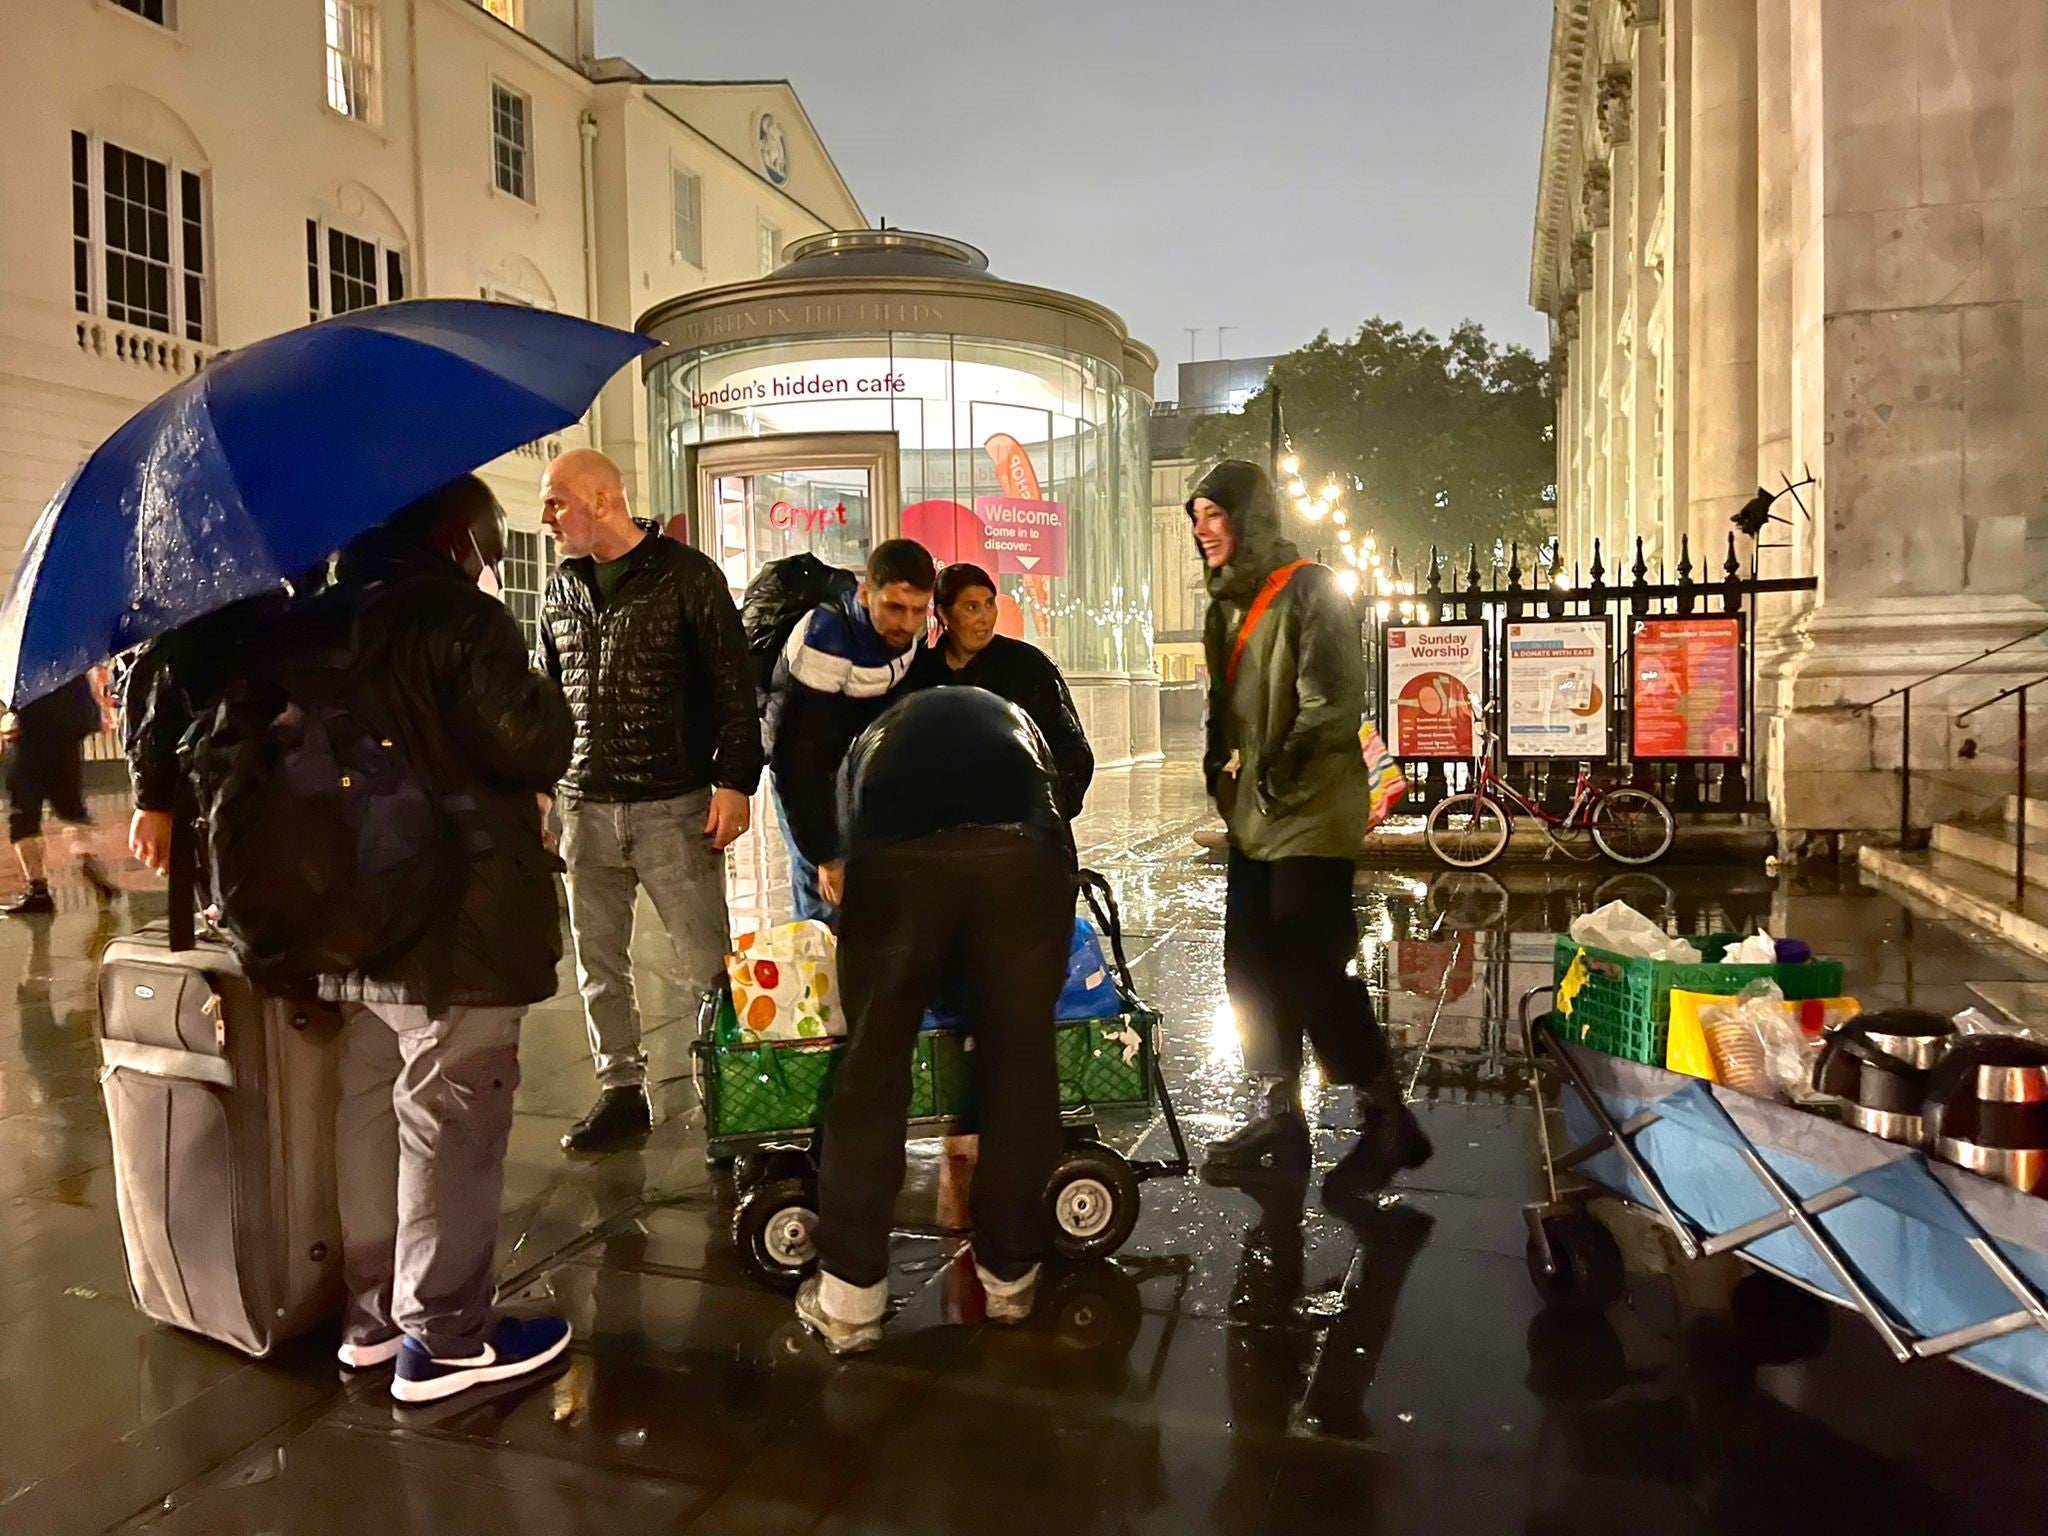 People arrived to help in the pouring rain as the event was cancelled following the Queen’s death (@dulmum/PA)